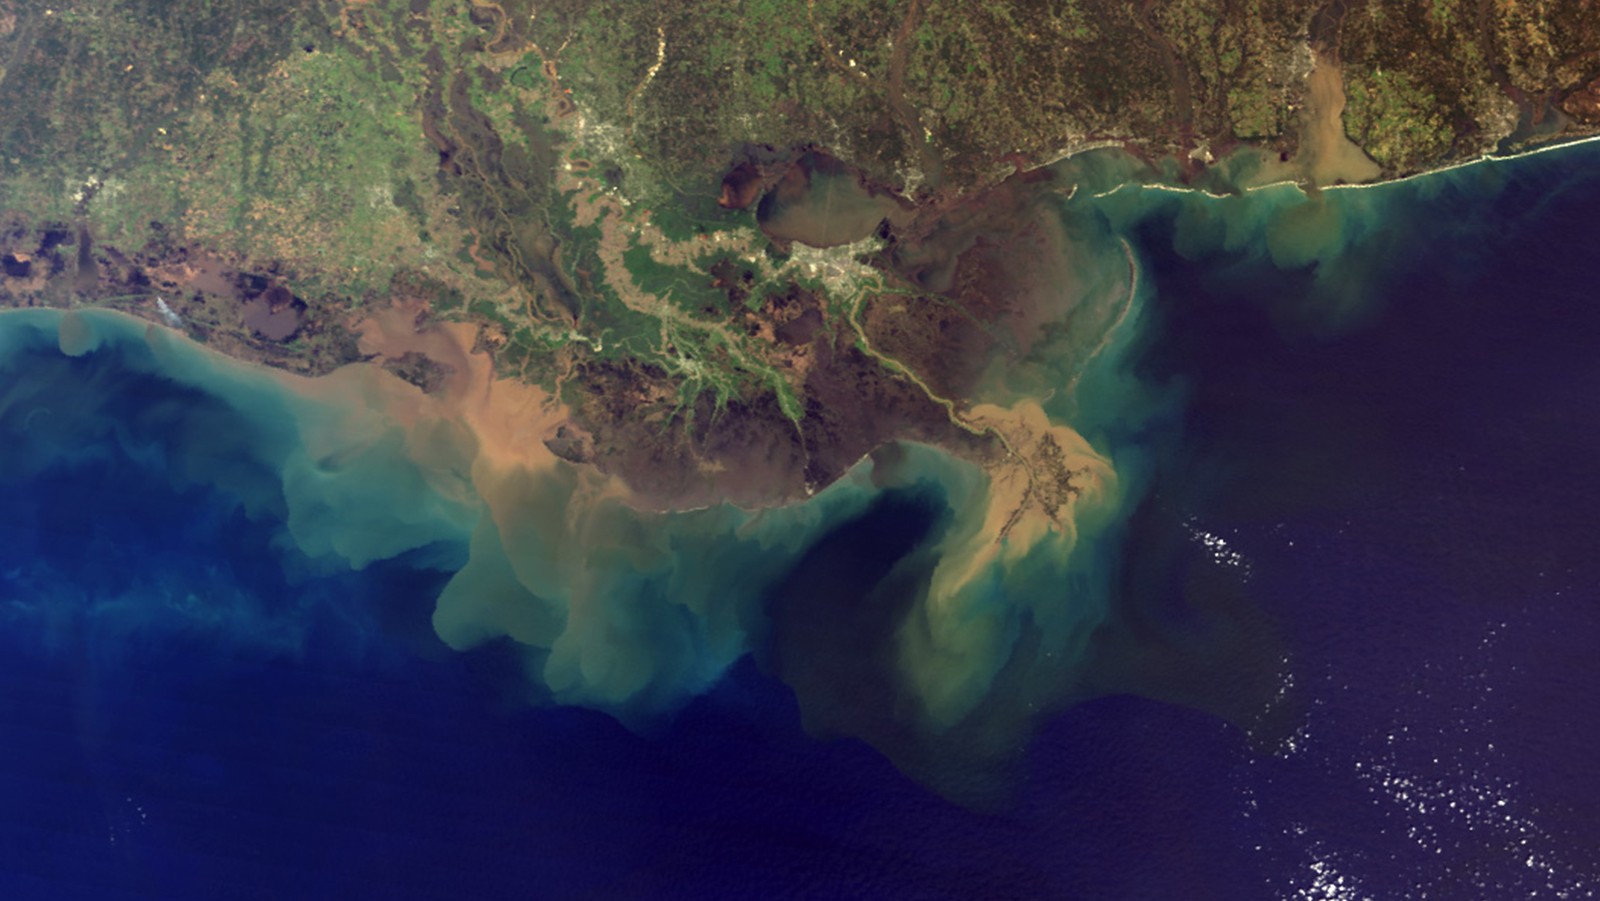 Shown is the murky brown water of the Mississippi River plume mixing with the dark blue water of the Gulf two days after a rainstorm. Image Credit: NASA’s MODIS